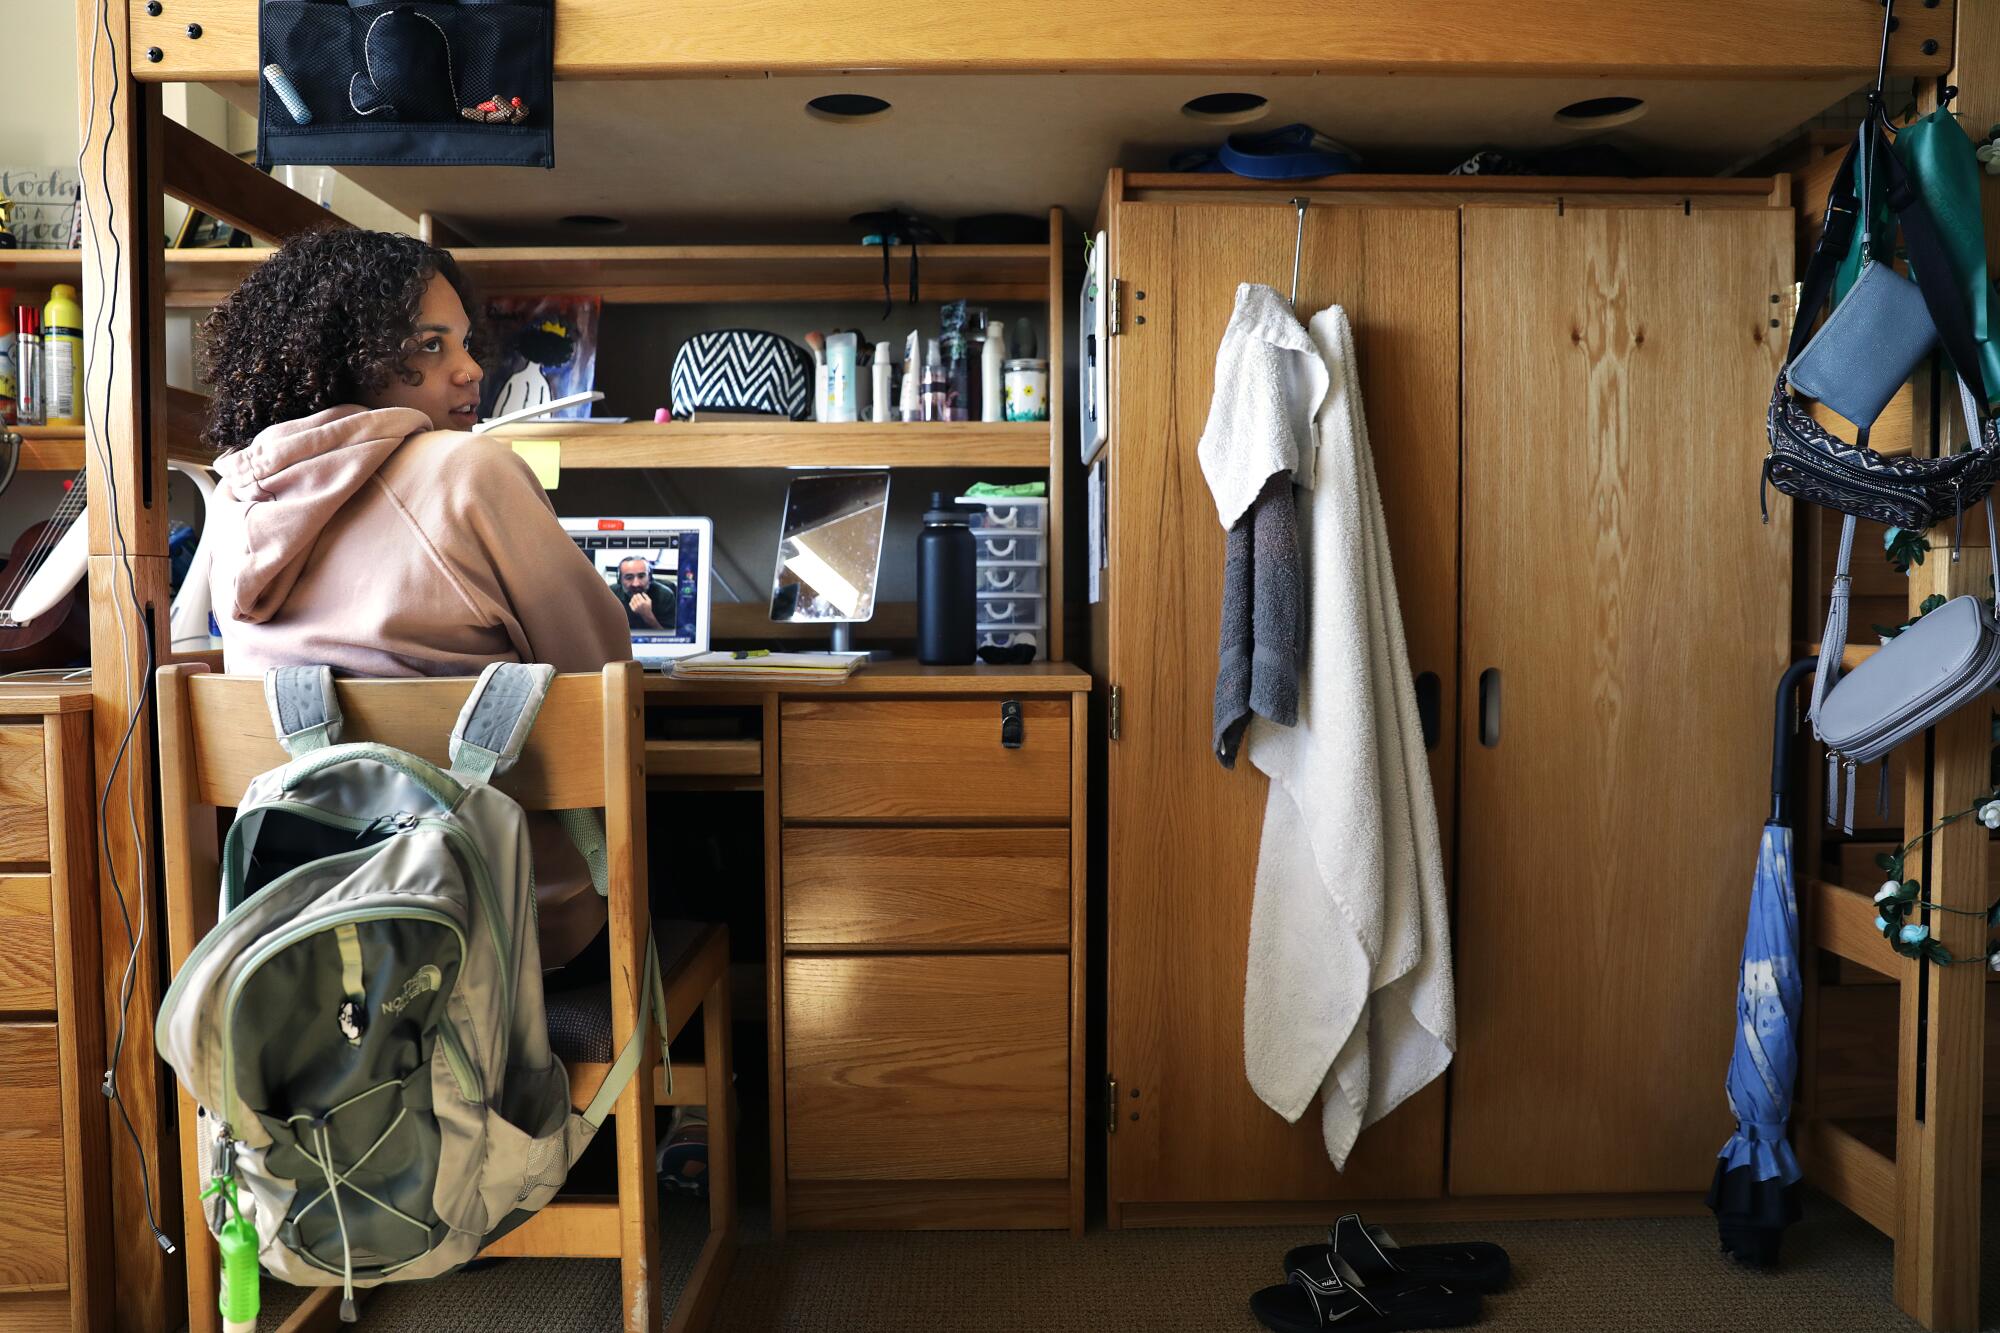 UCLA student Kiera Laney, 20, attends a class online in her dorm room on campus.